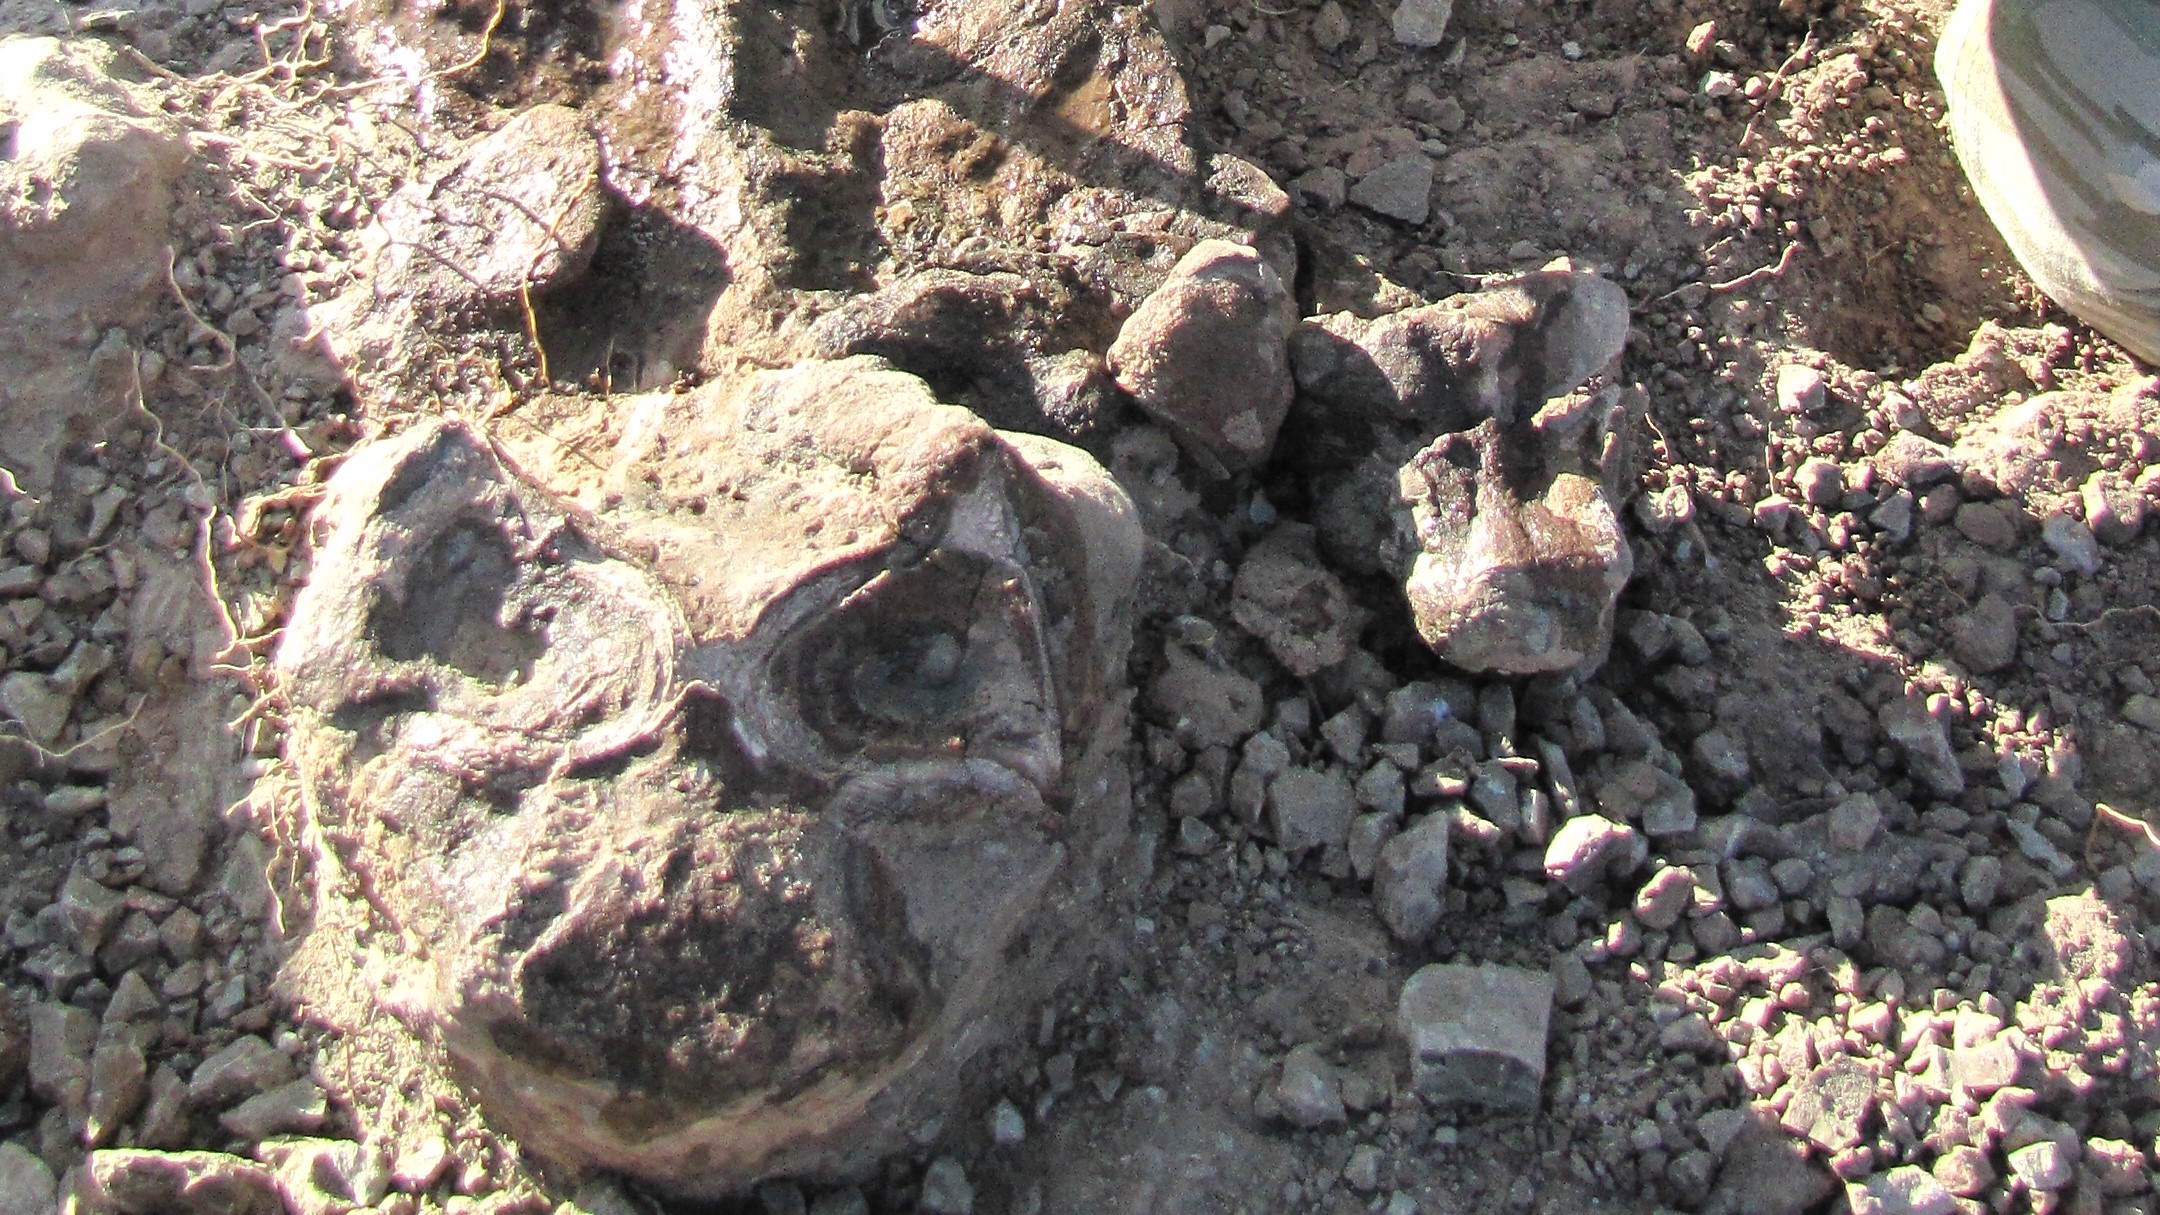 Face-to-face with a lystrosaurus fossil in the field.  The animals seemed to have died in clusters, perhaps they were gathering around shrinking water supplies during a drought.